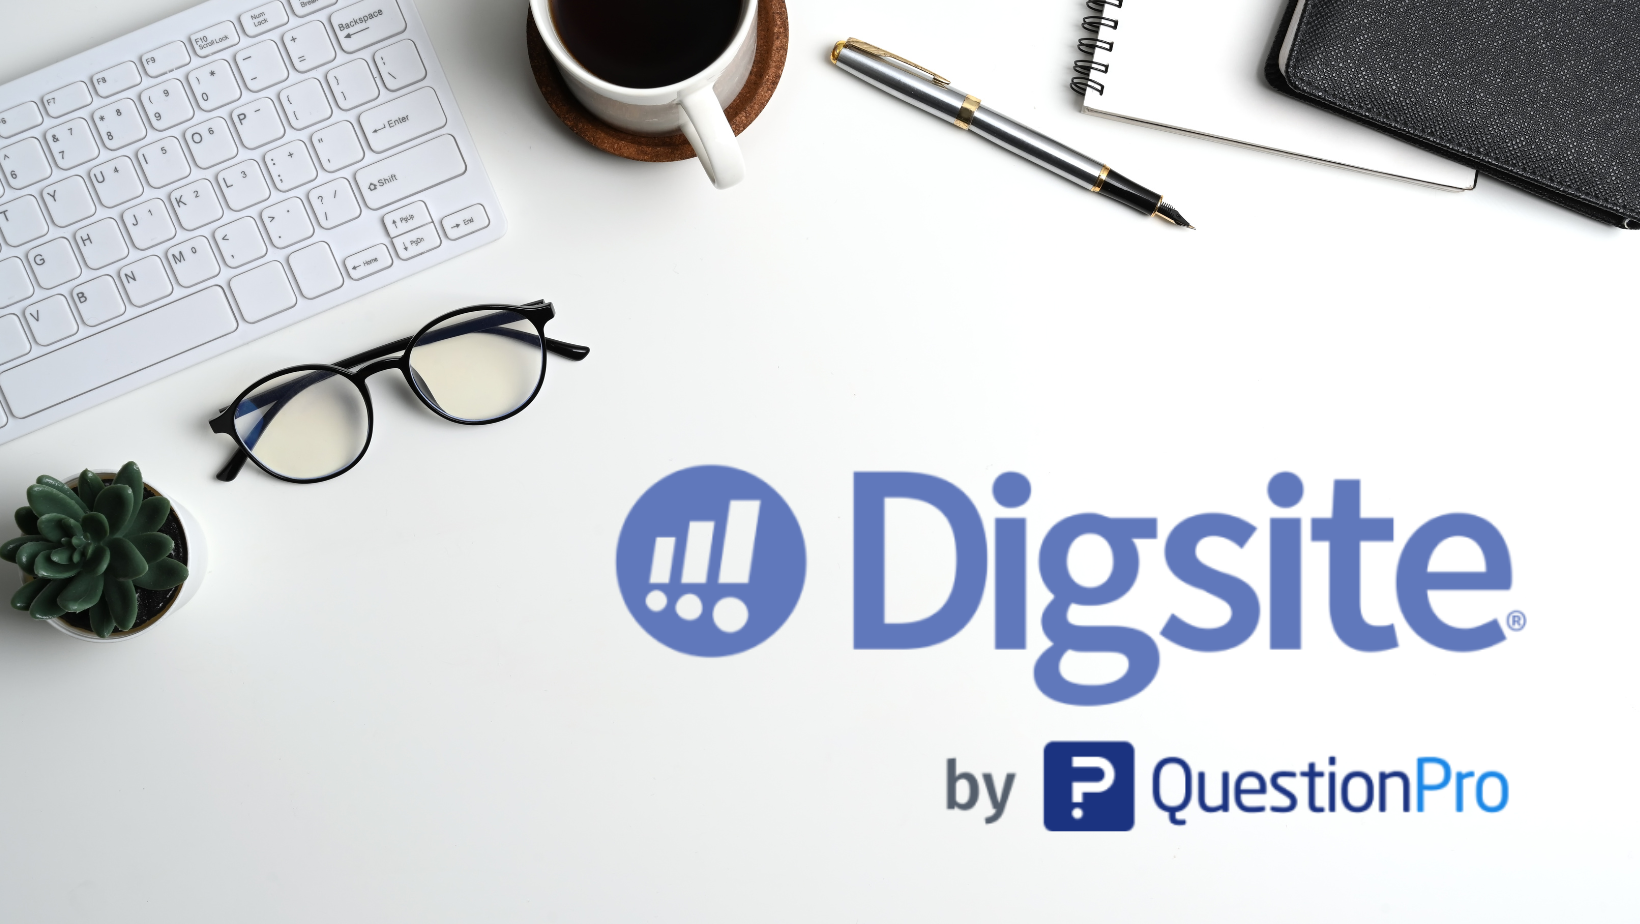 What You Should Know about Digsite by QuestionPro